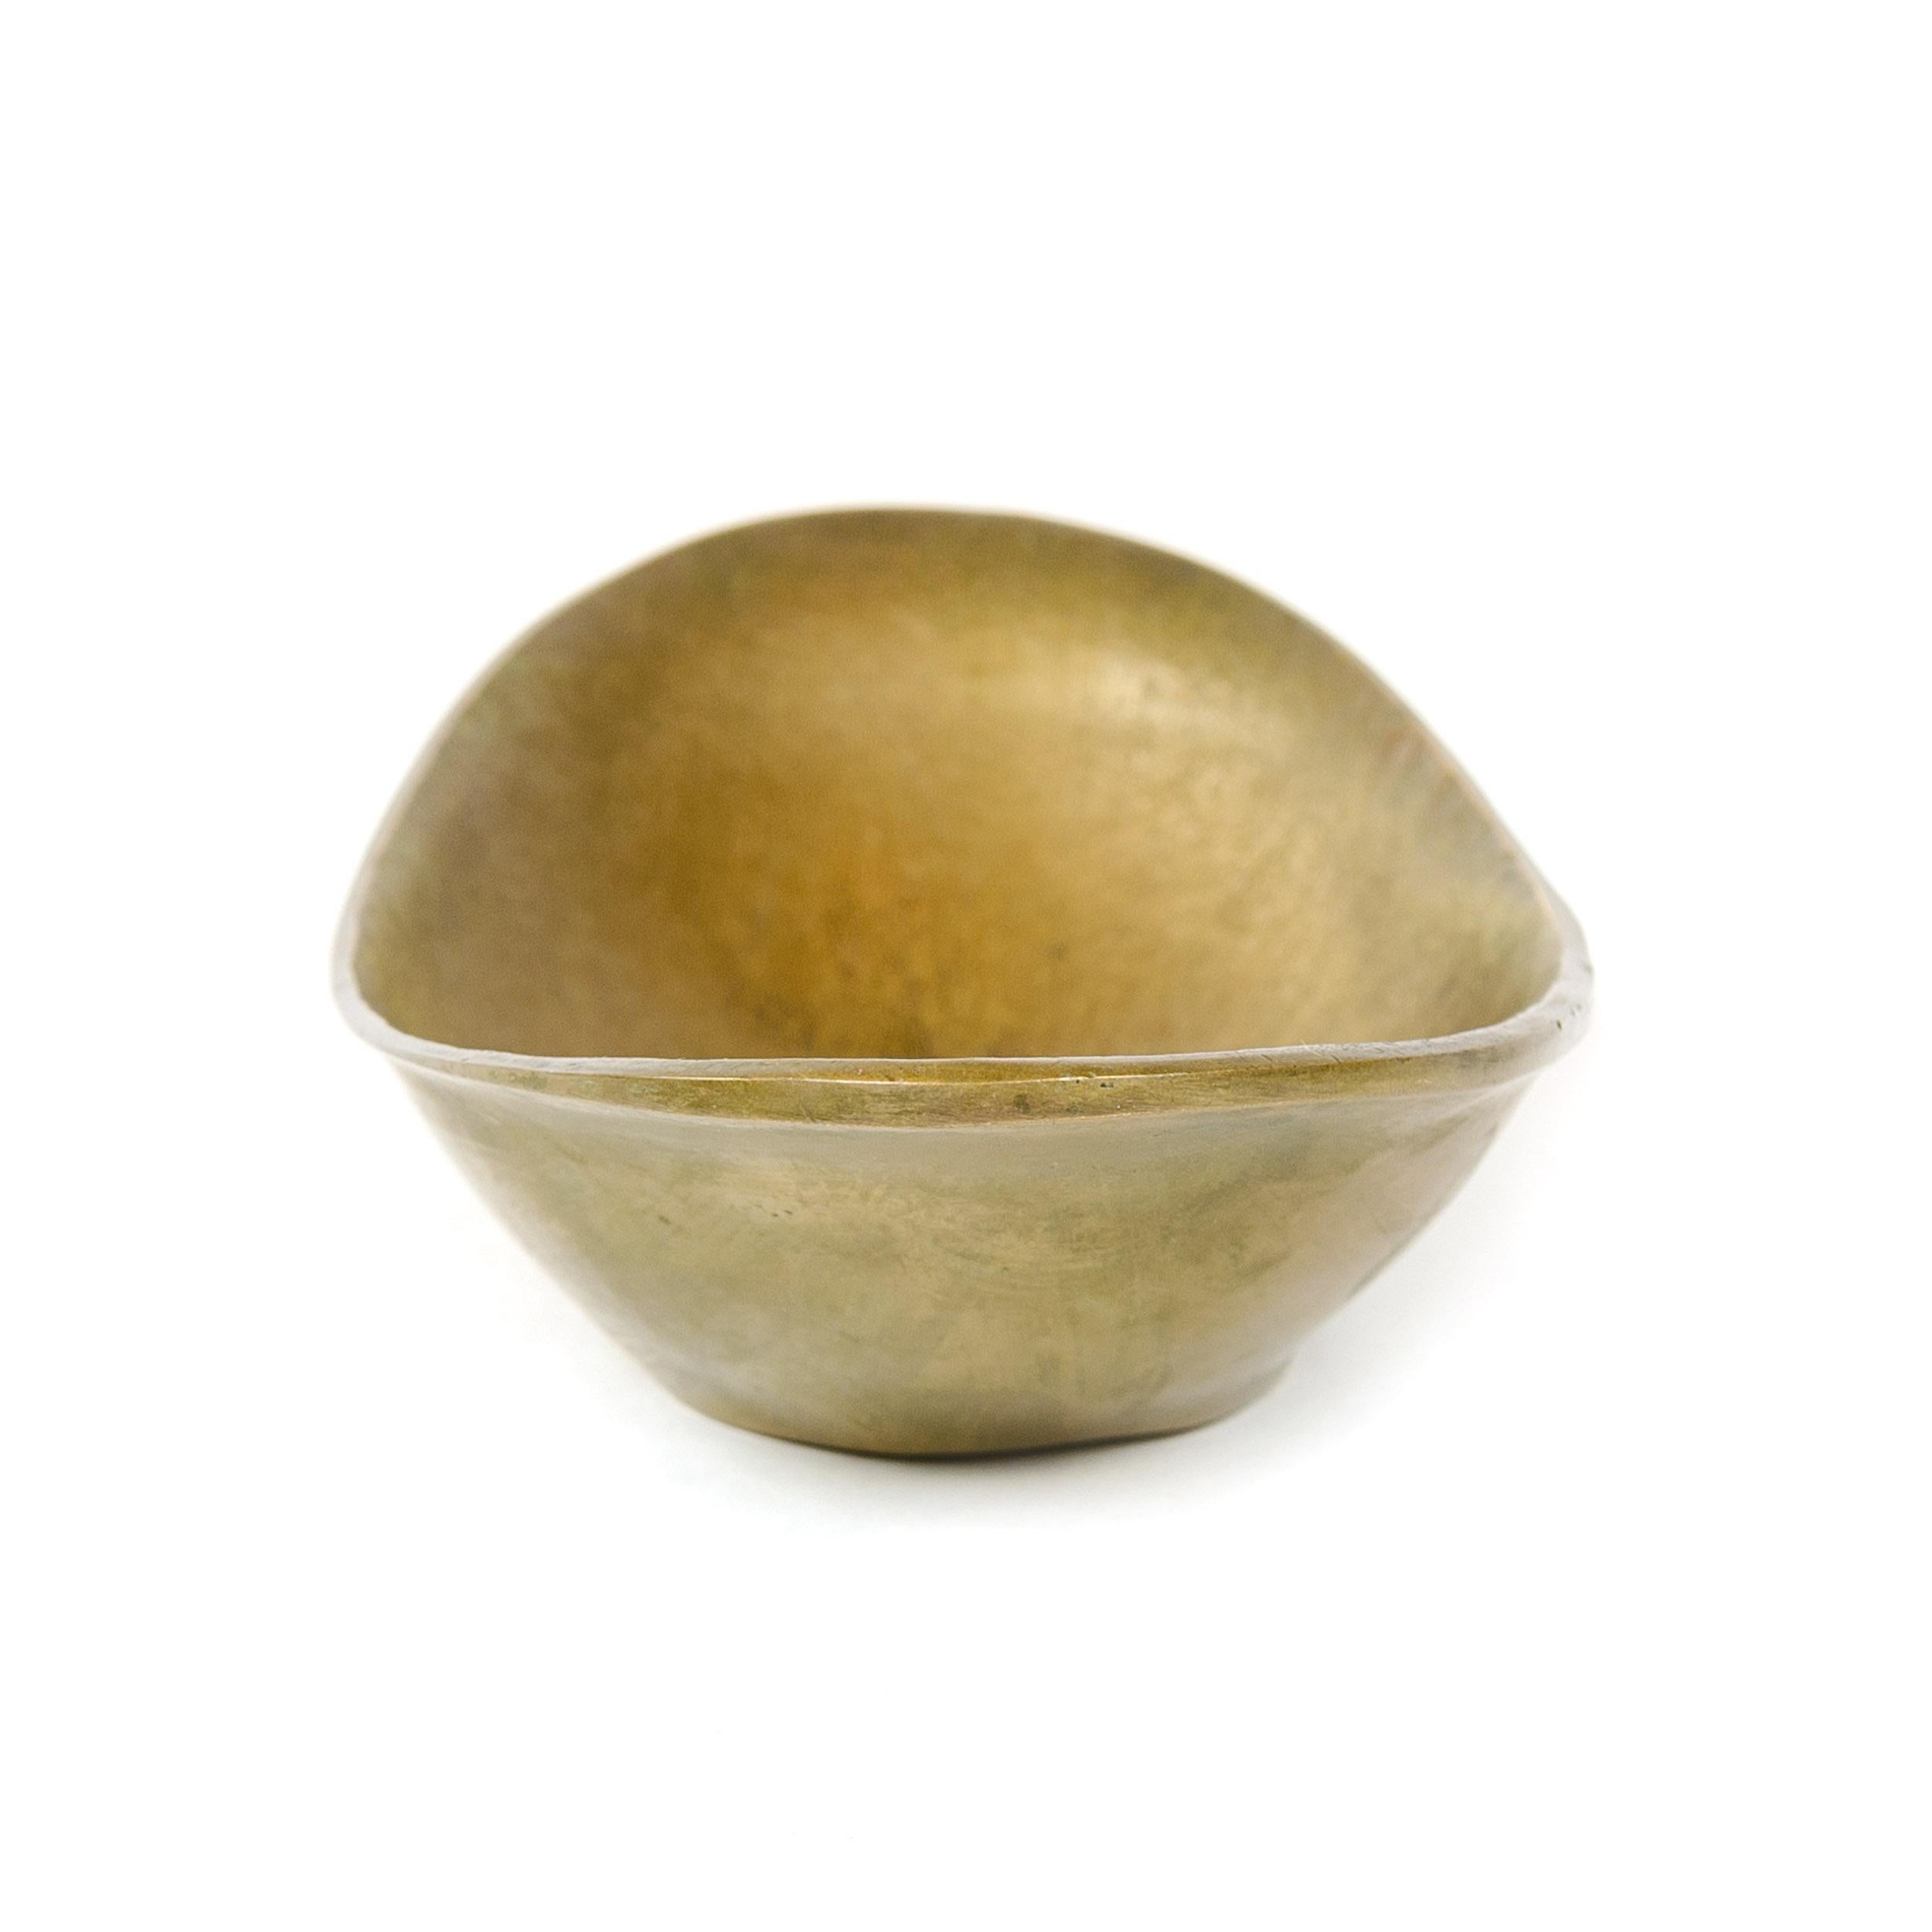 Low, boat-shaped oval bowl of solid brass. The bowl's interior displays a subtle, finely incised design which radiates from the center of the bowl to its outer edges. 'Made in Germany' in block letters is impressed on the underside.